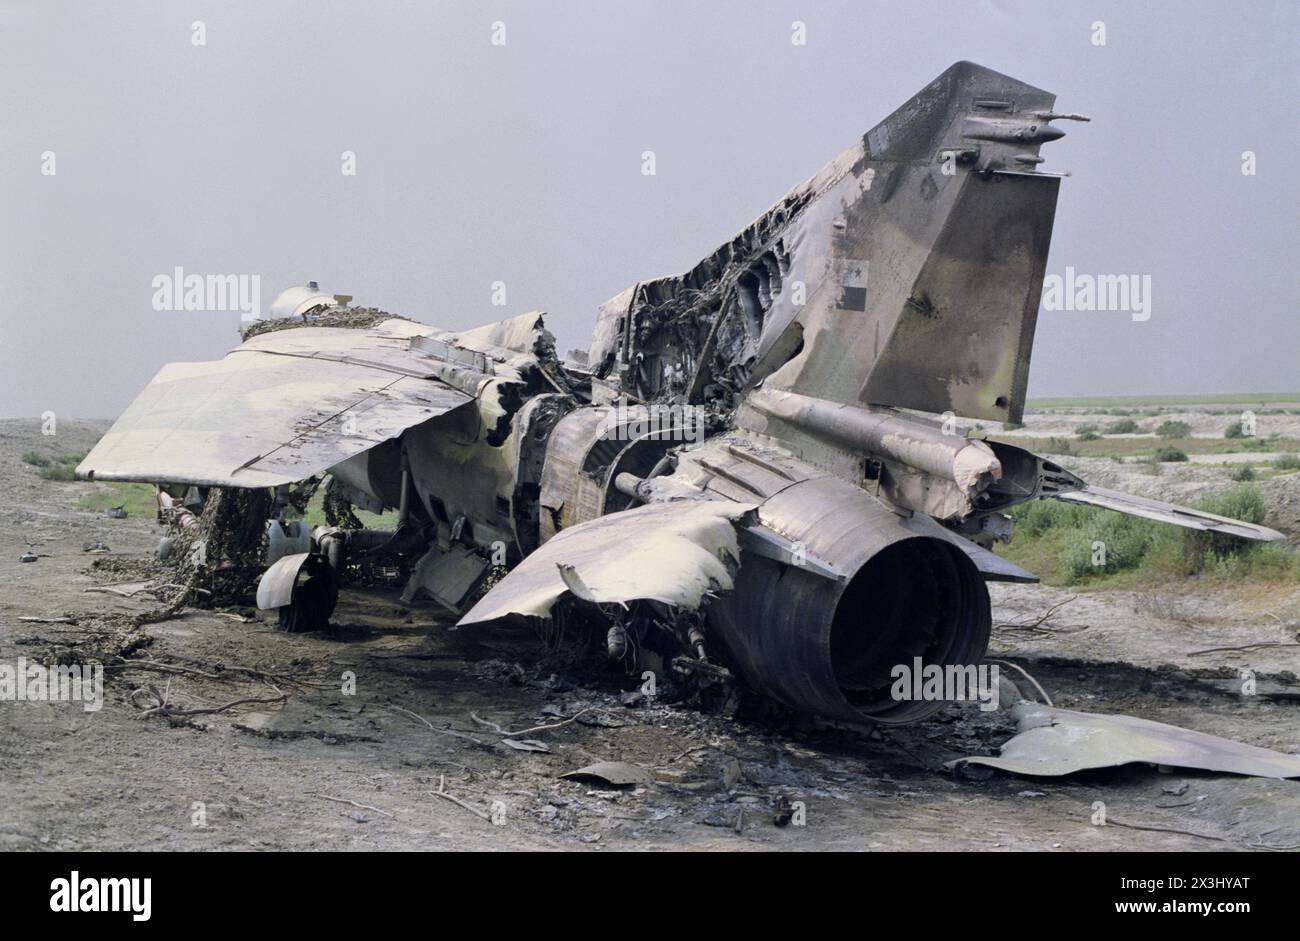 2nd April 1991 A destroyed Iraqi Air Force, Soviet-made MiG-23 “Flogger” jet fighter, number 23181, near the Tallil Air Base in southern Iraq. Stock Photo